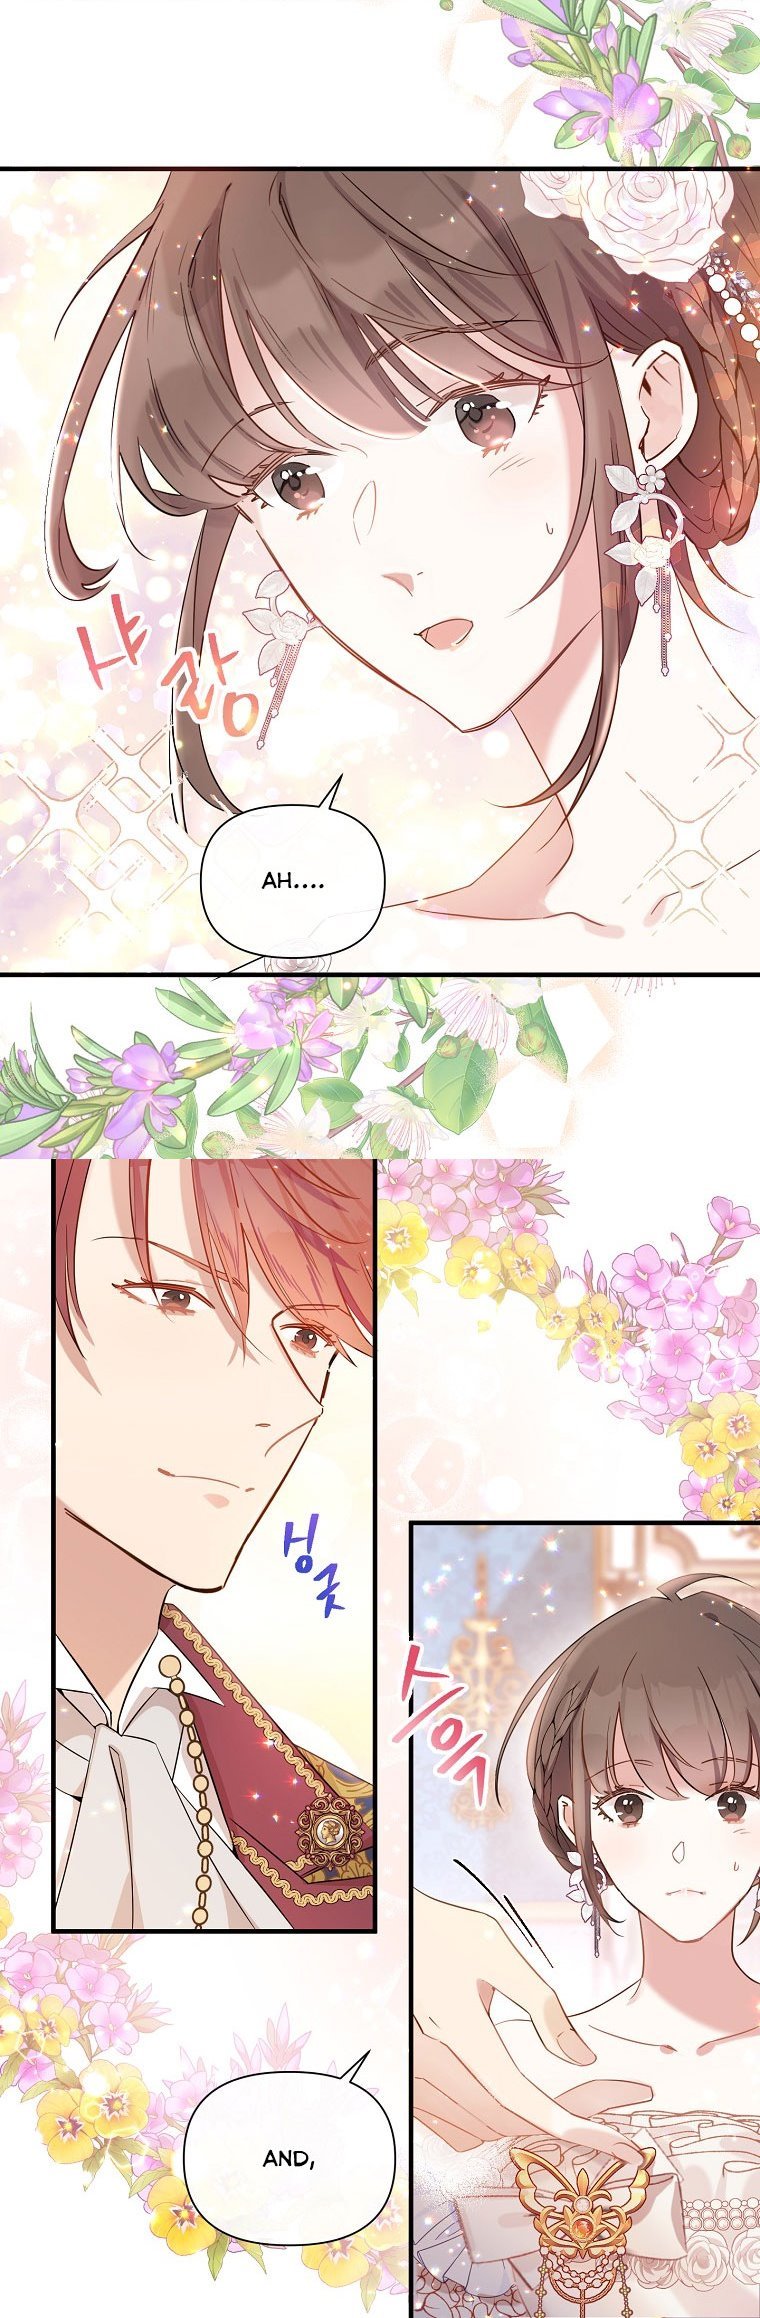 Marriage B chapter 12